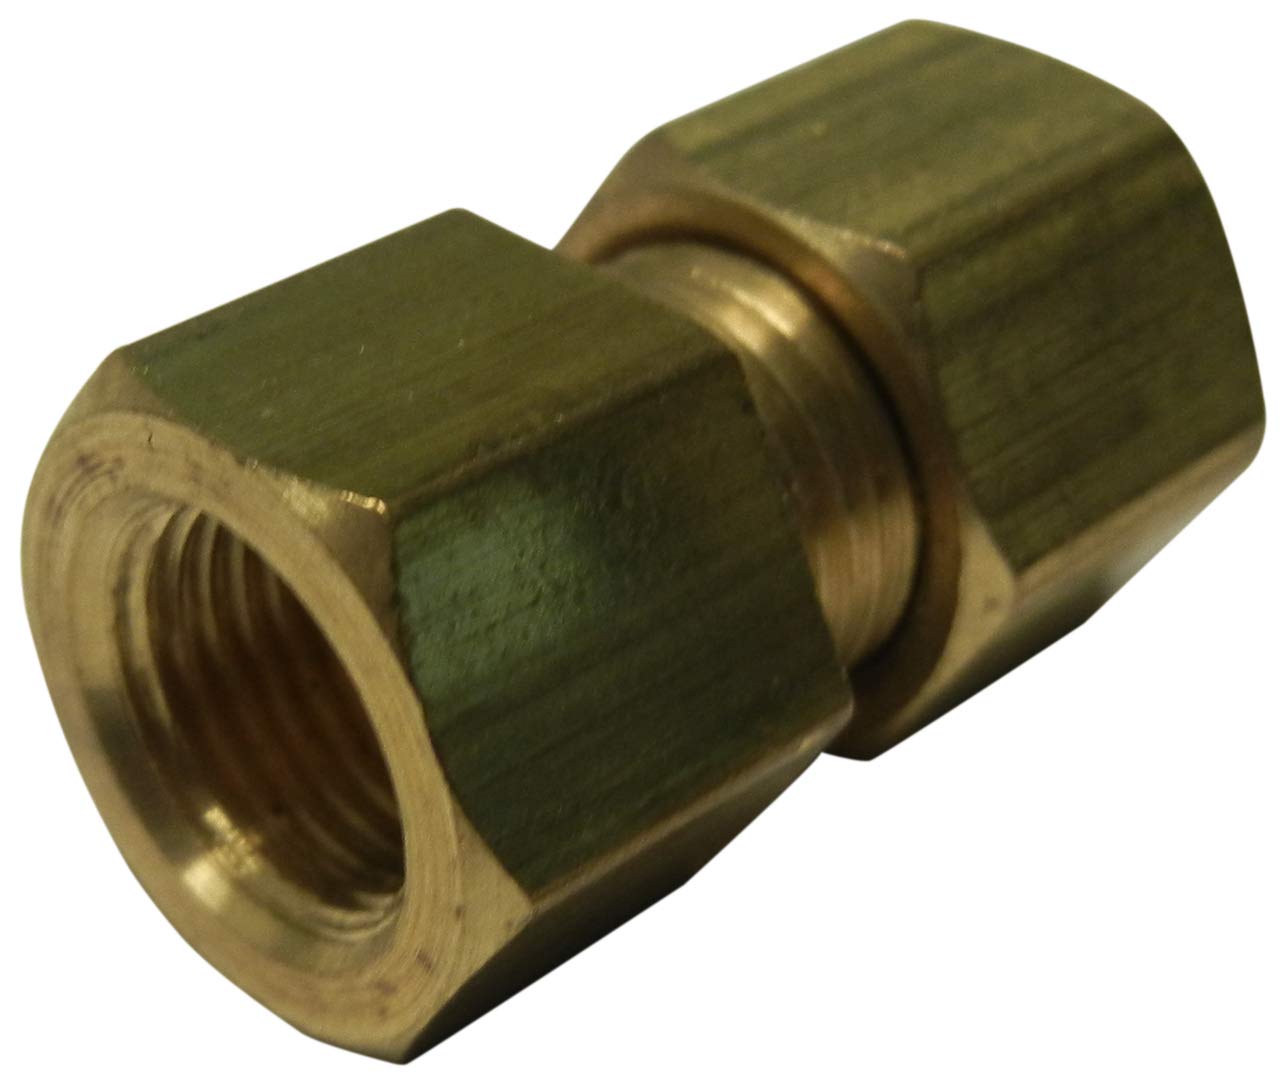 0.125 FPT x 0.125 female compression fitting